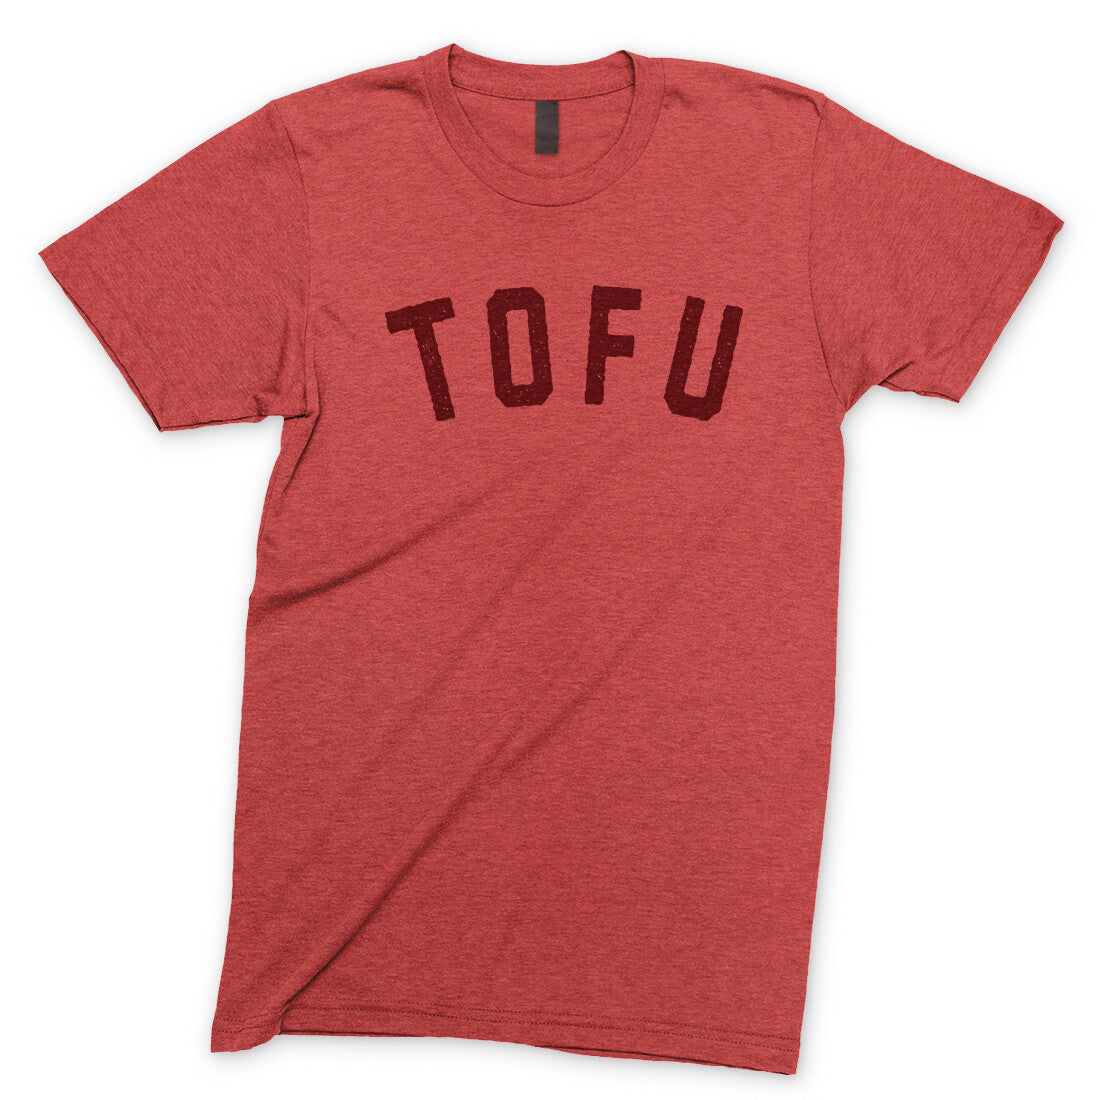 Tofu in Heather Red Color